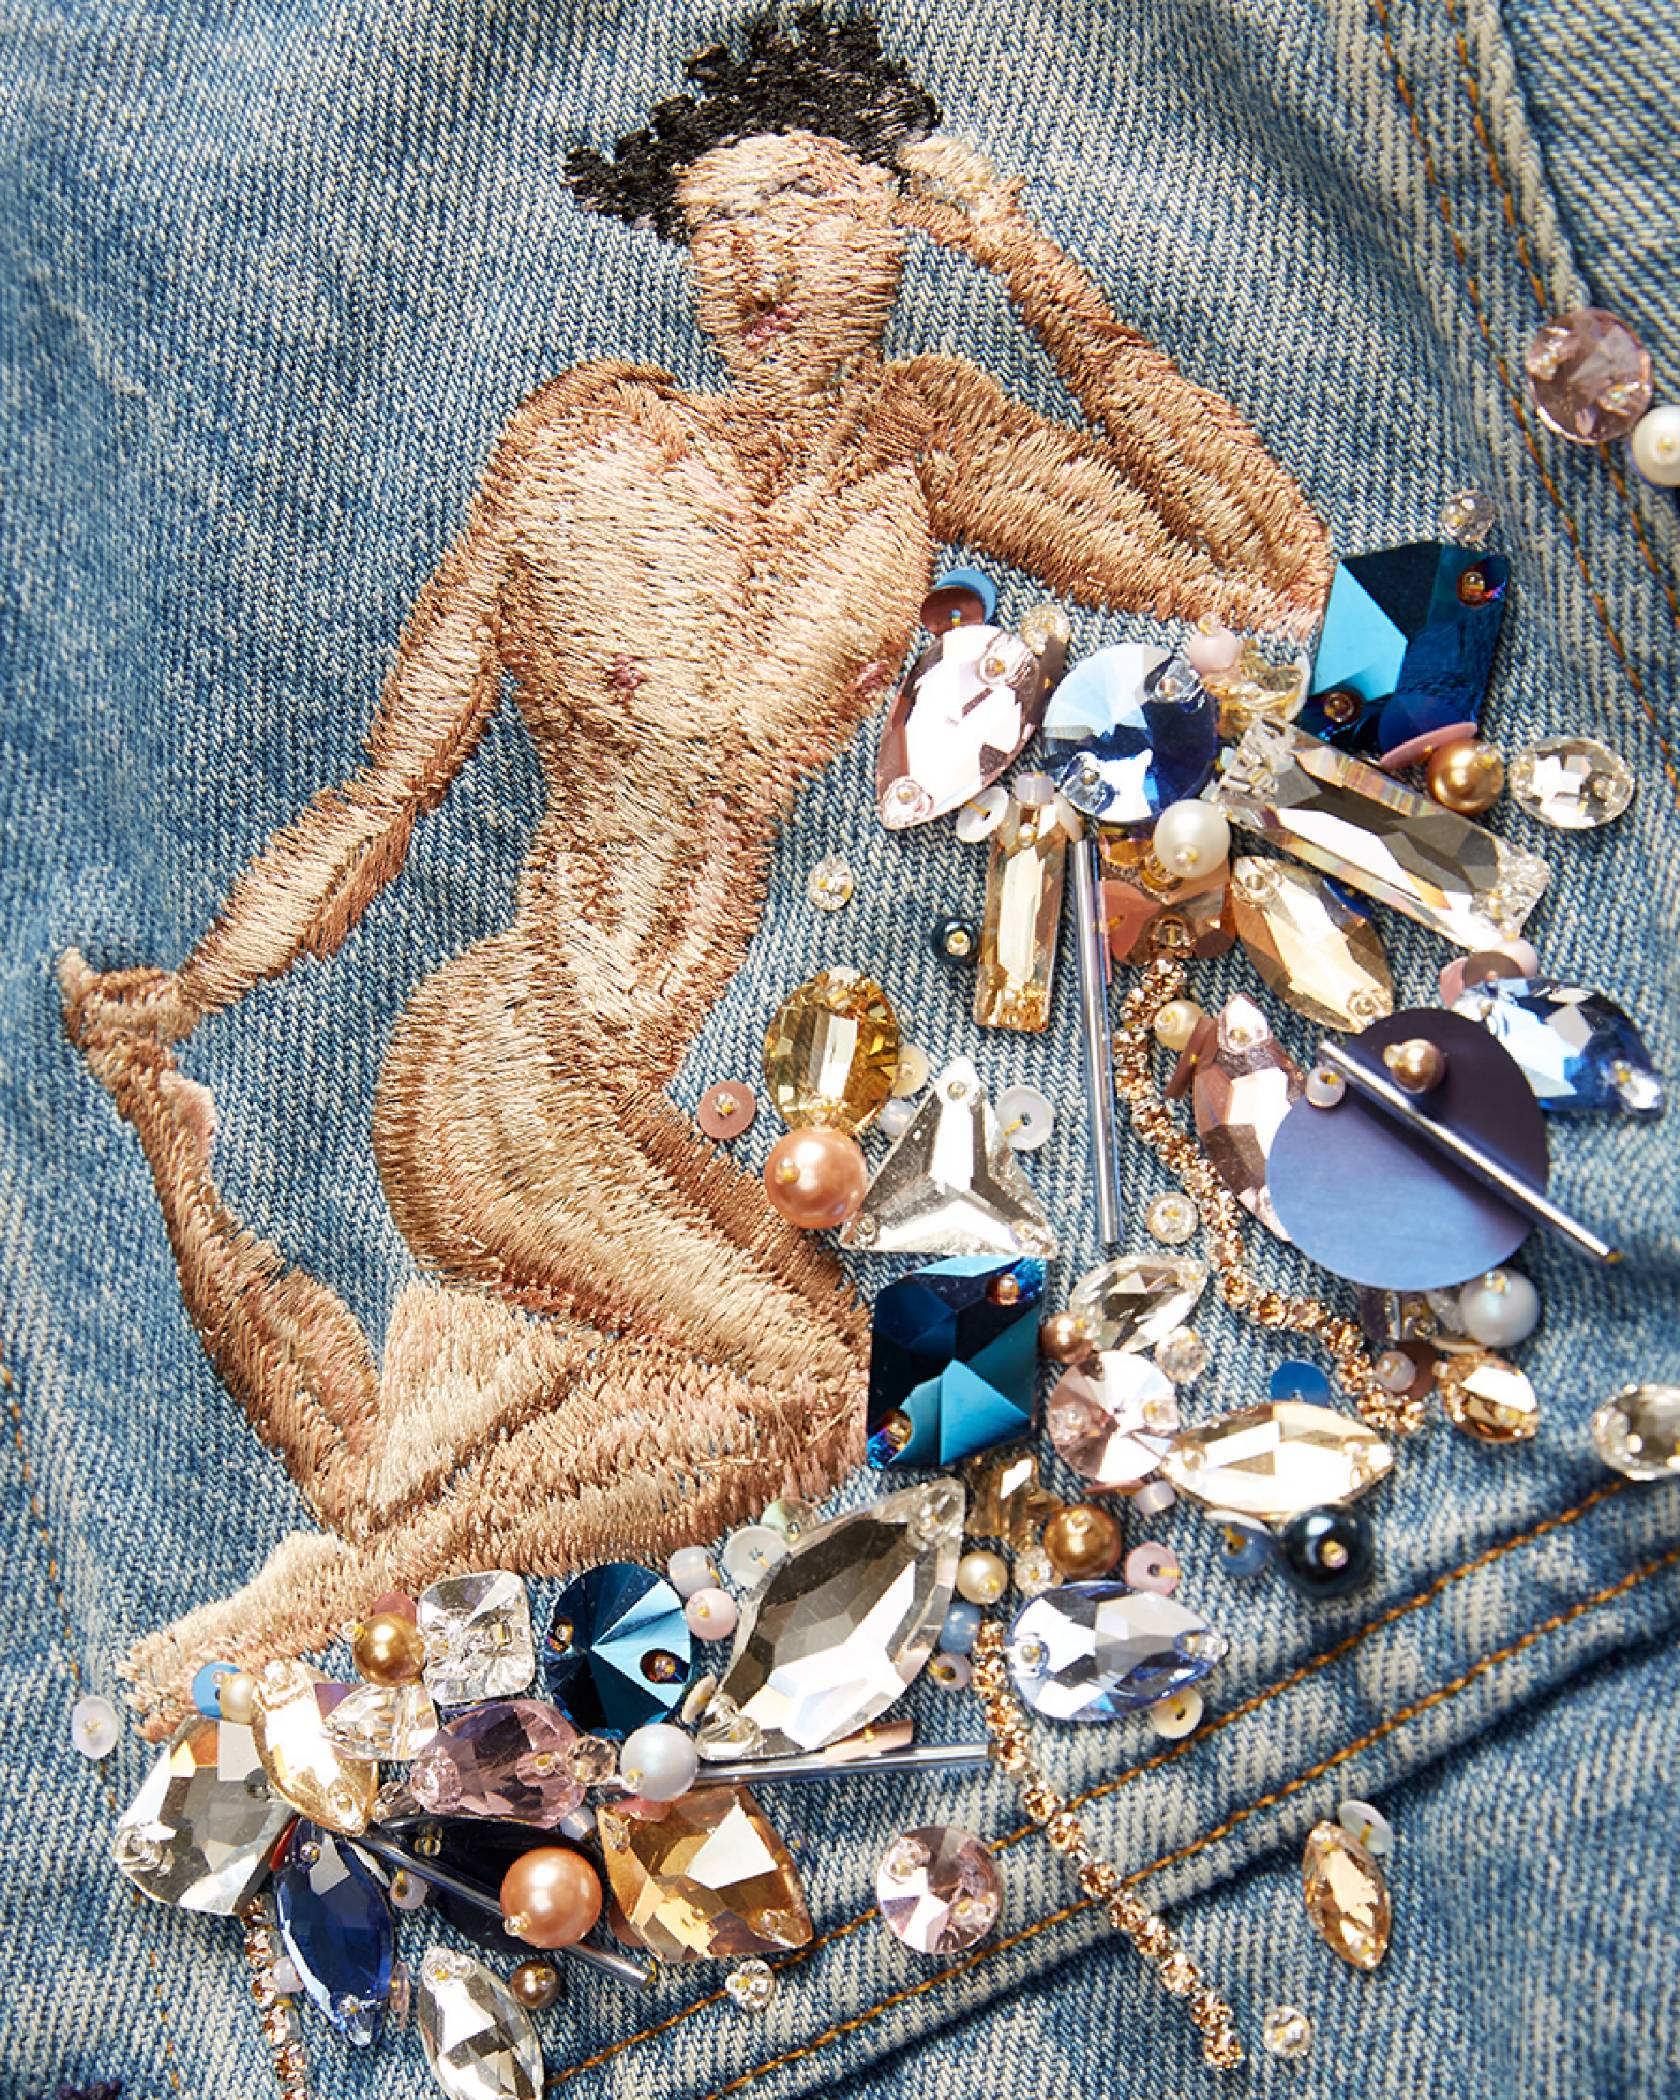 Close up image of the embroidery work of Michael-Birch Pierce for their collaboration. The embroidering shows an outline of a human lying on a bed of embroidered jewels on a trucker jacket.